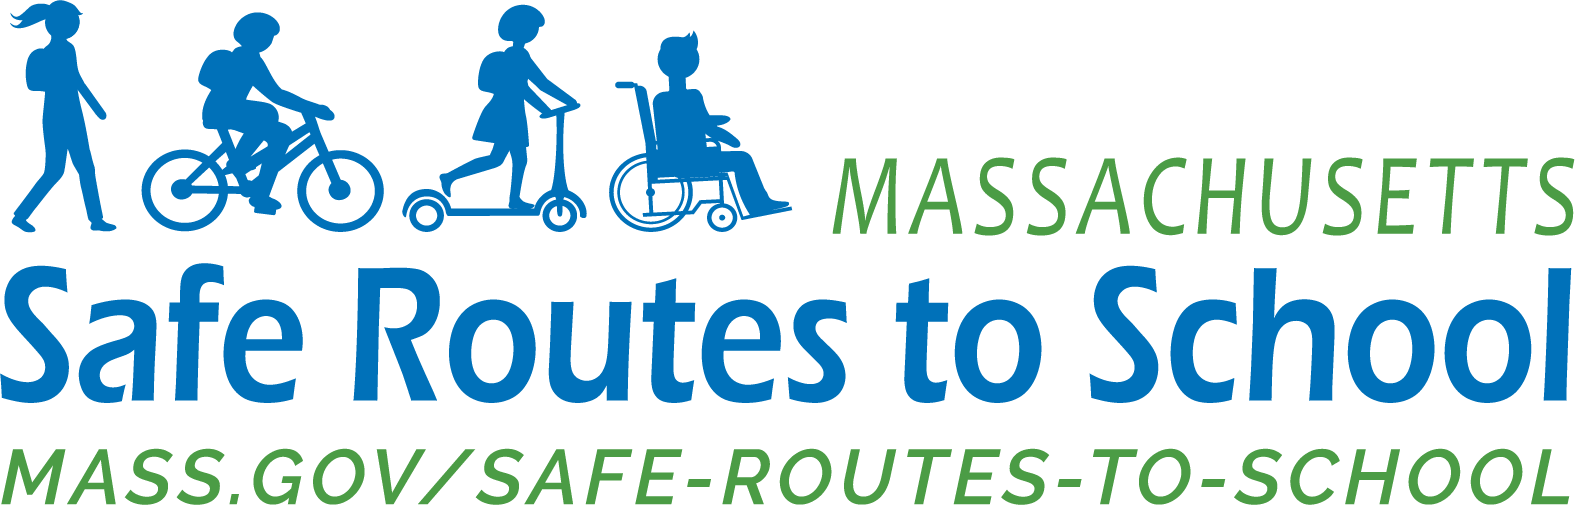 safe routes to school mass